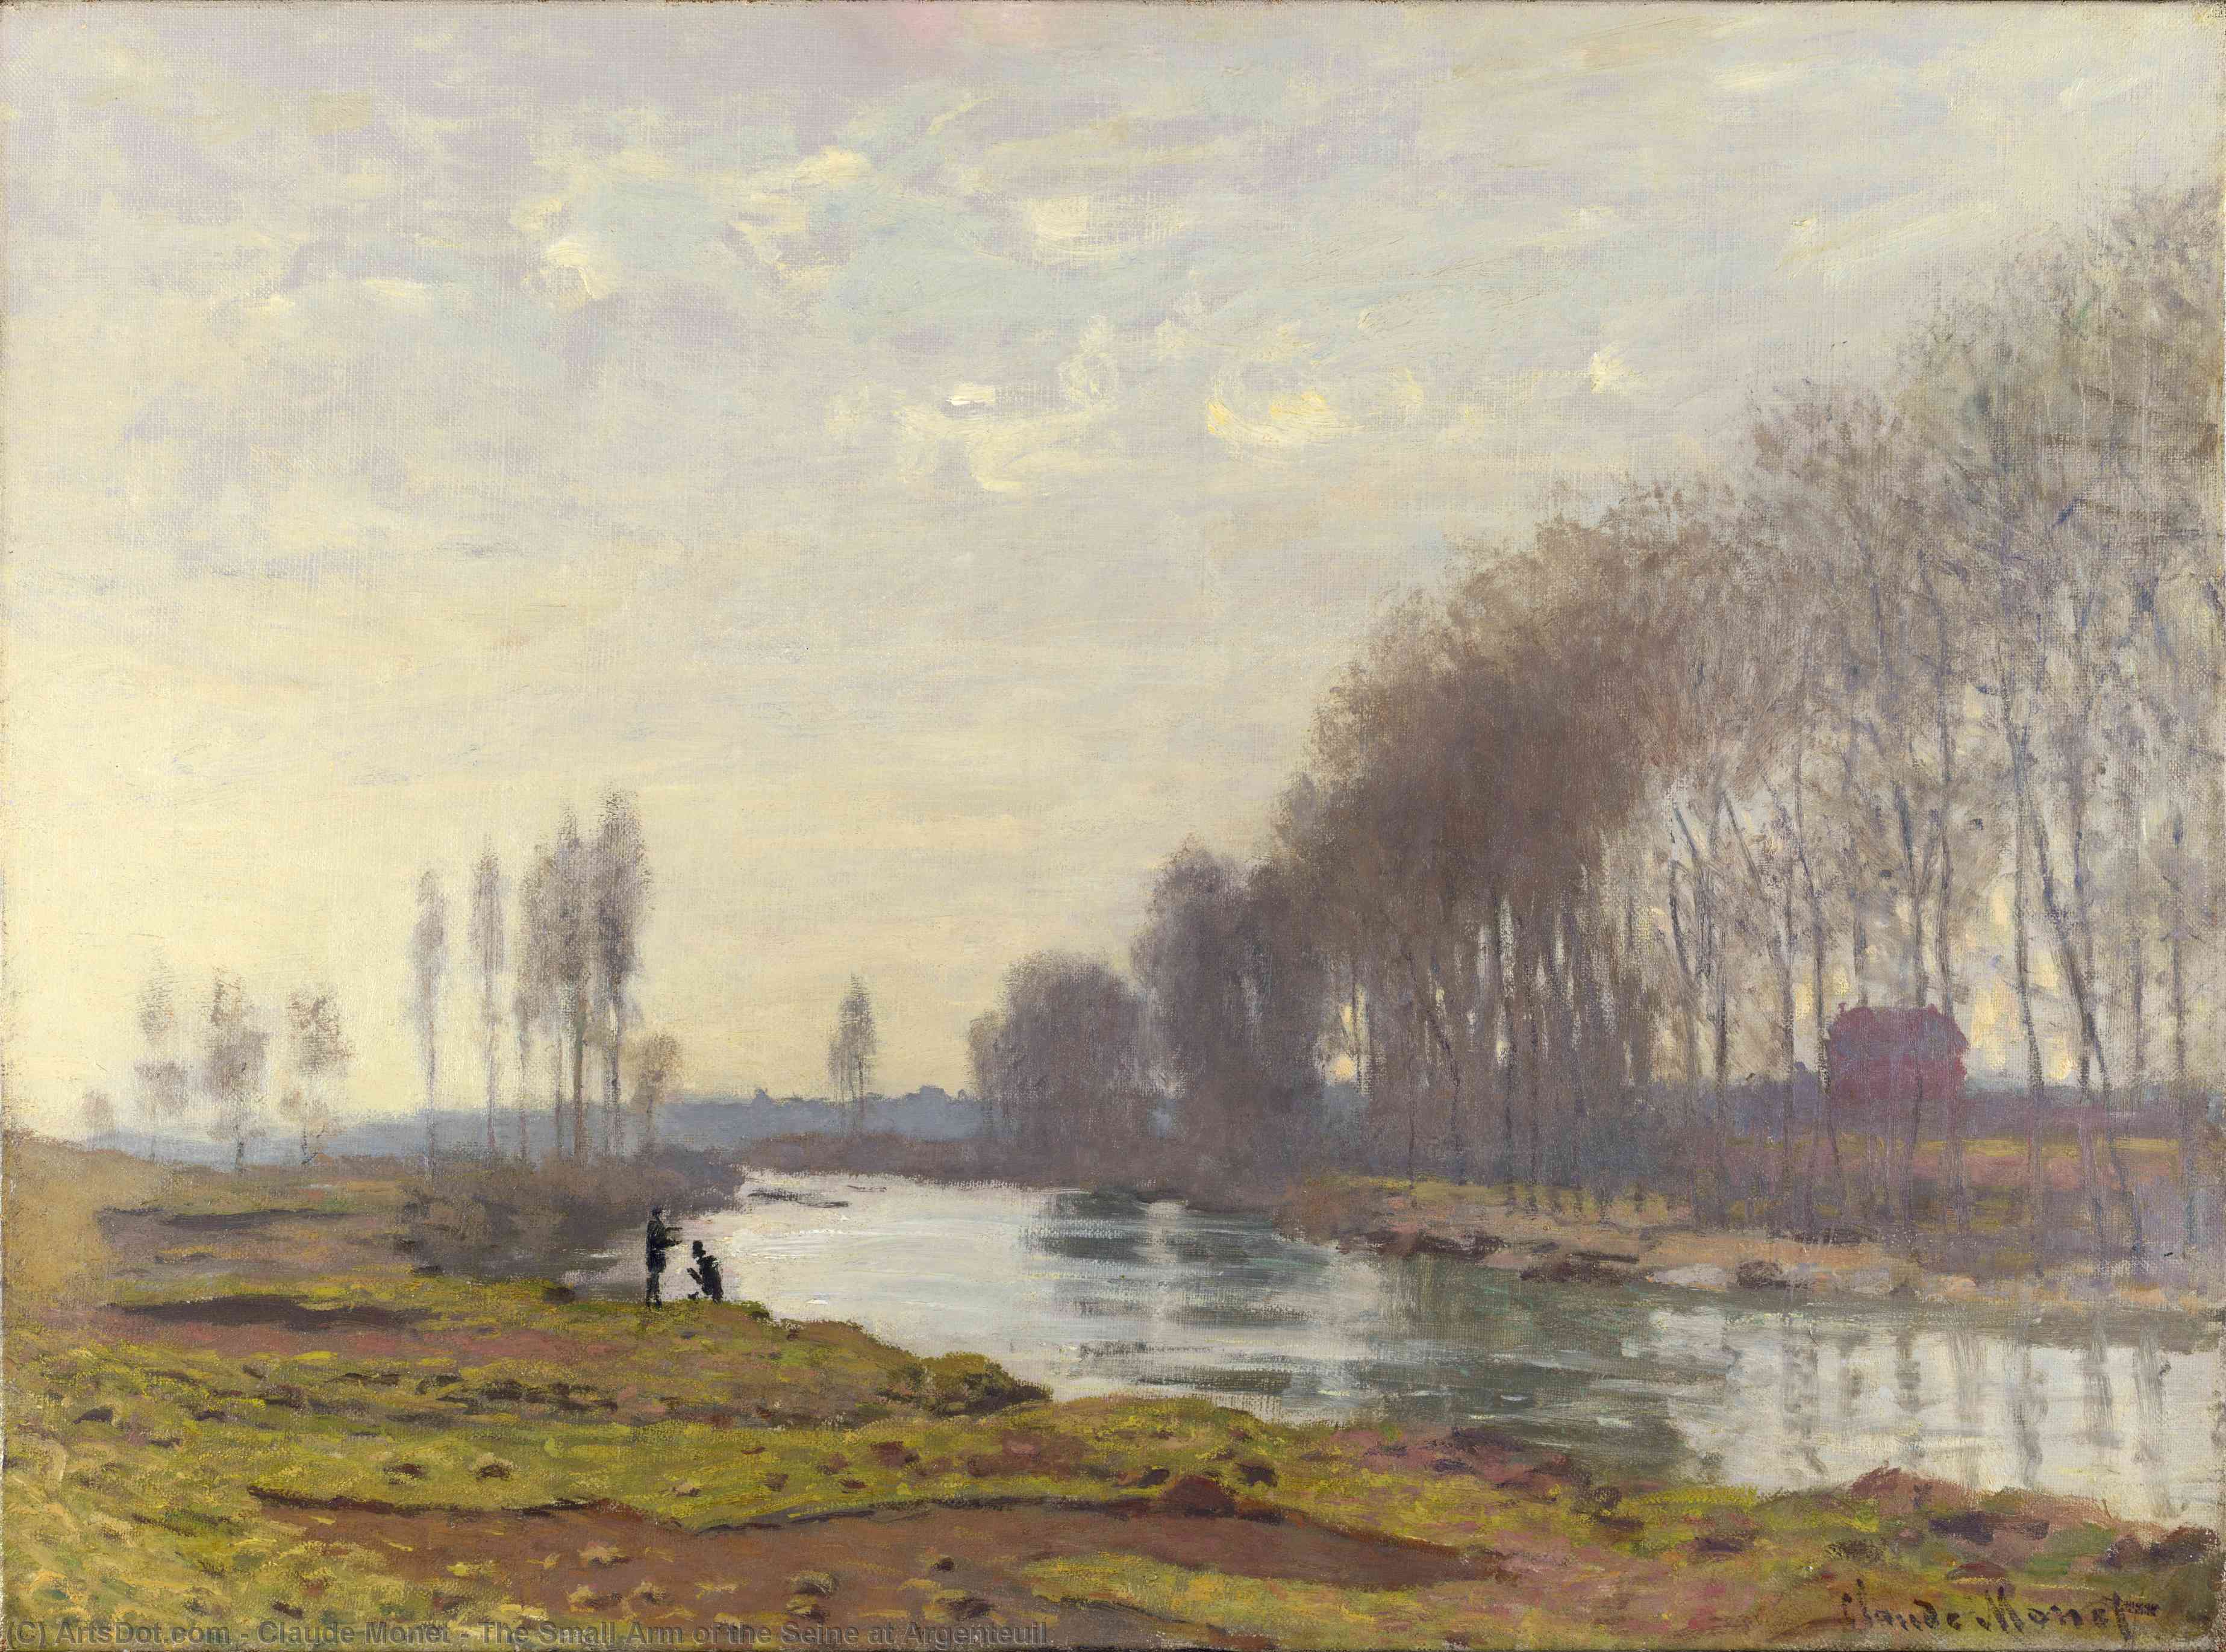 Buy Museum Art Reproductions The Small Arm of the Seine at Argenteuil, 1872 by Claude Monet (1840-1926, France) | ArtsDot.com